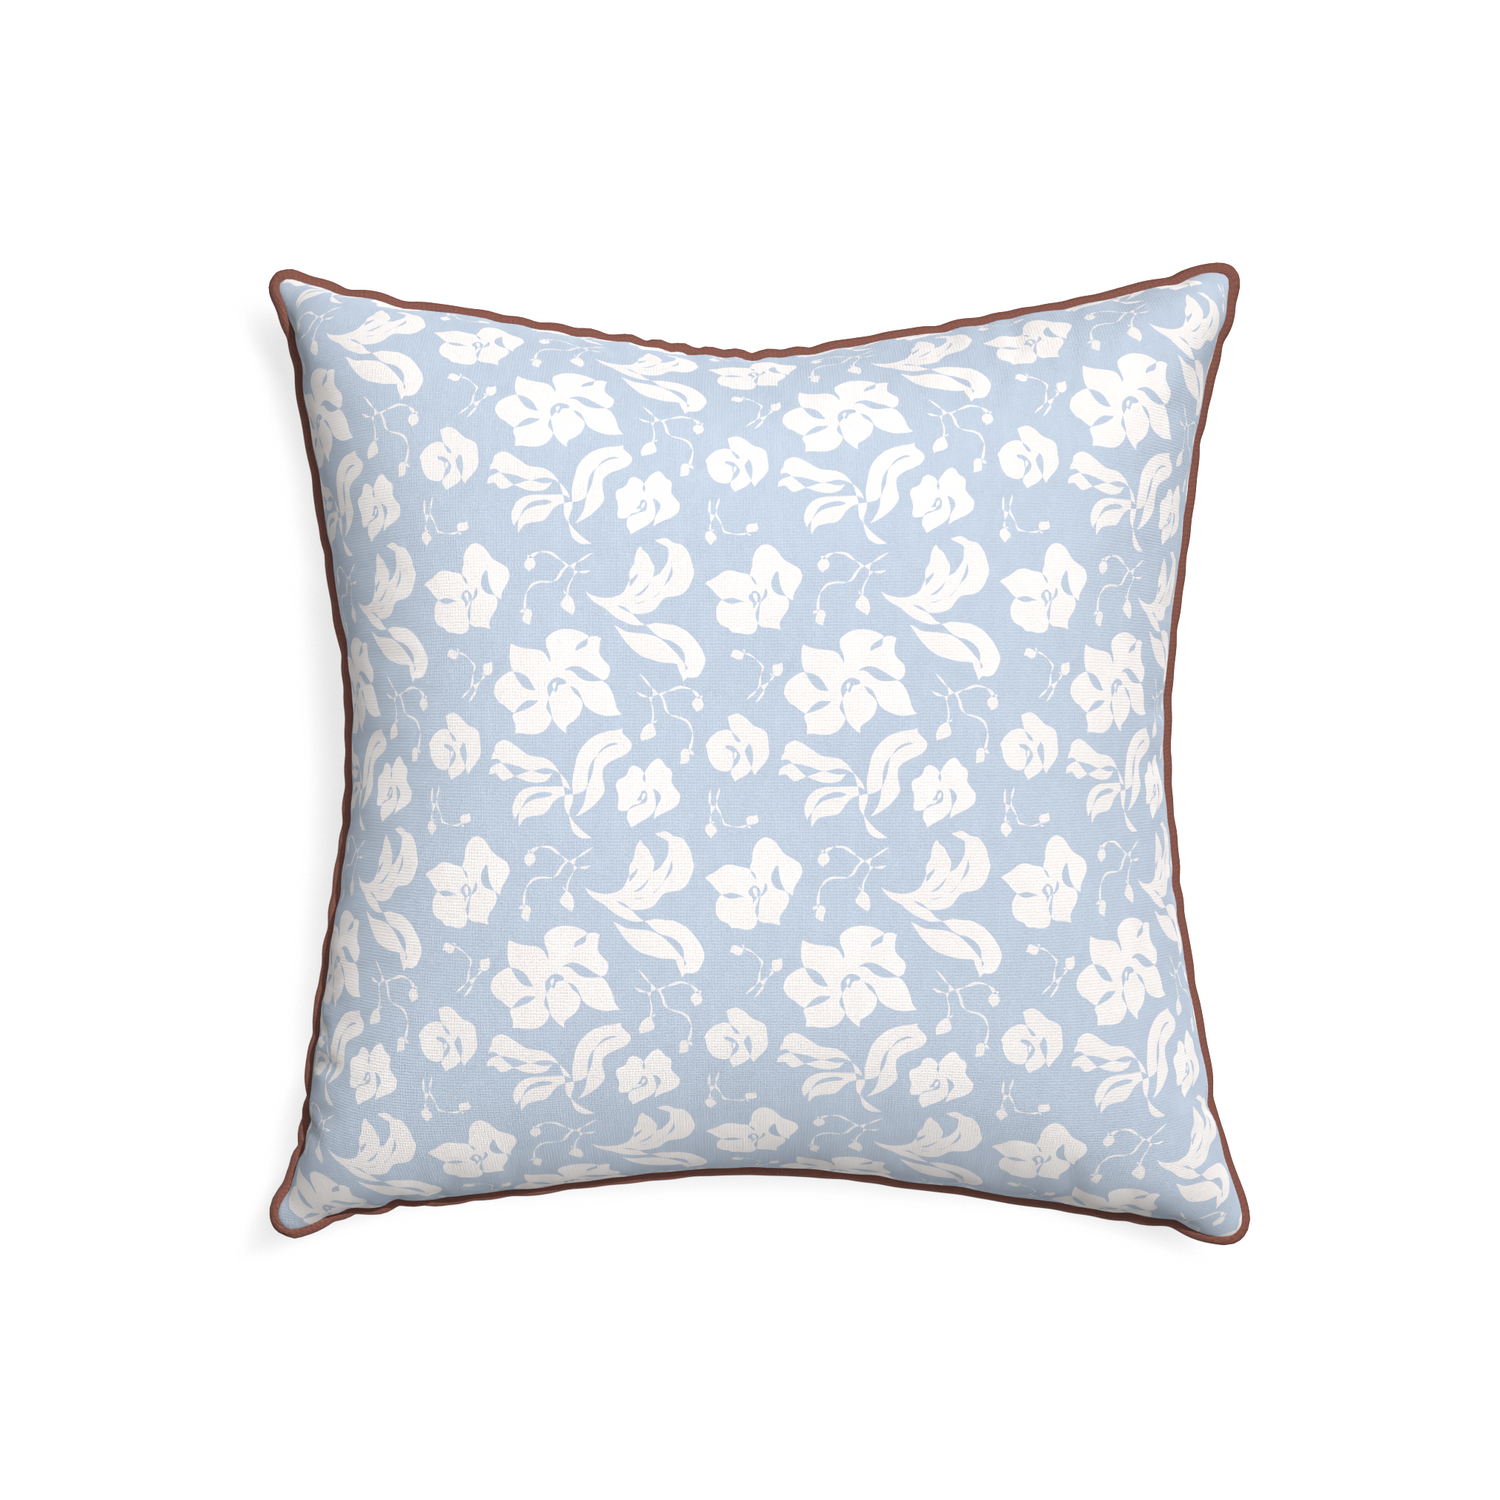 22-square georgia custom cornflower blue floralpillow with w piping on white background